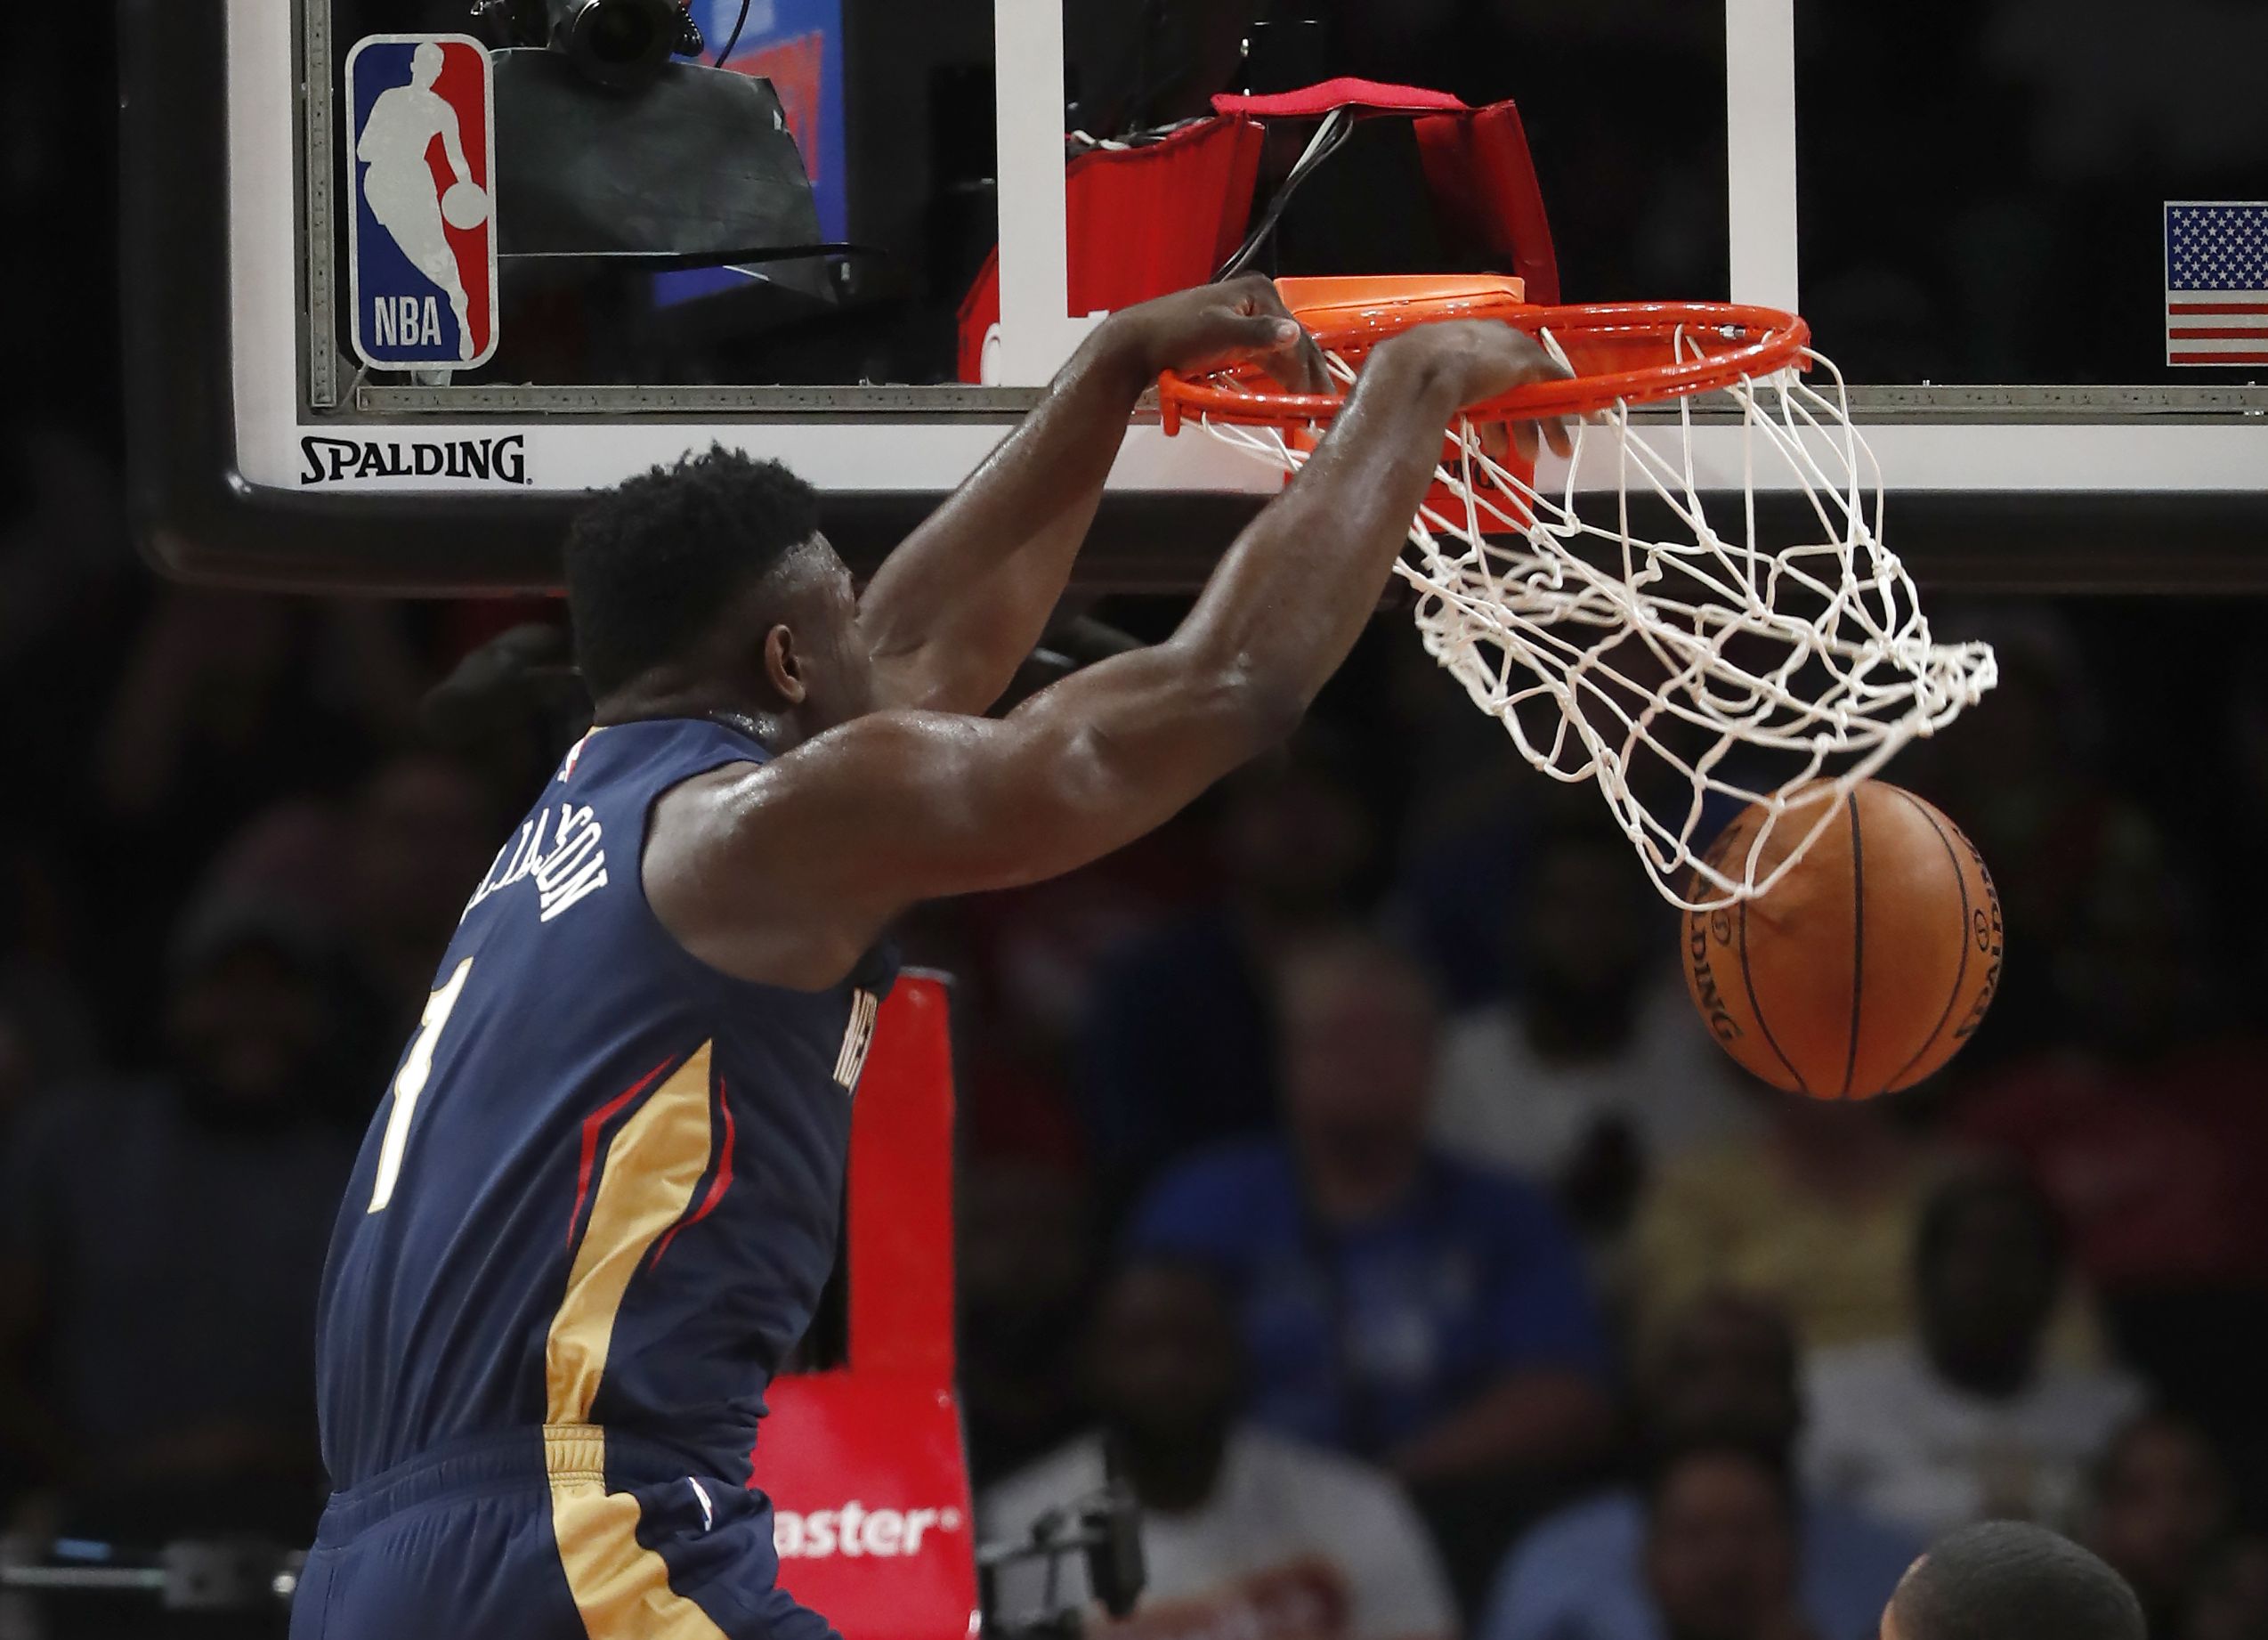 Zion Williamson's NBA highlight reel begins with dunking debut